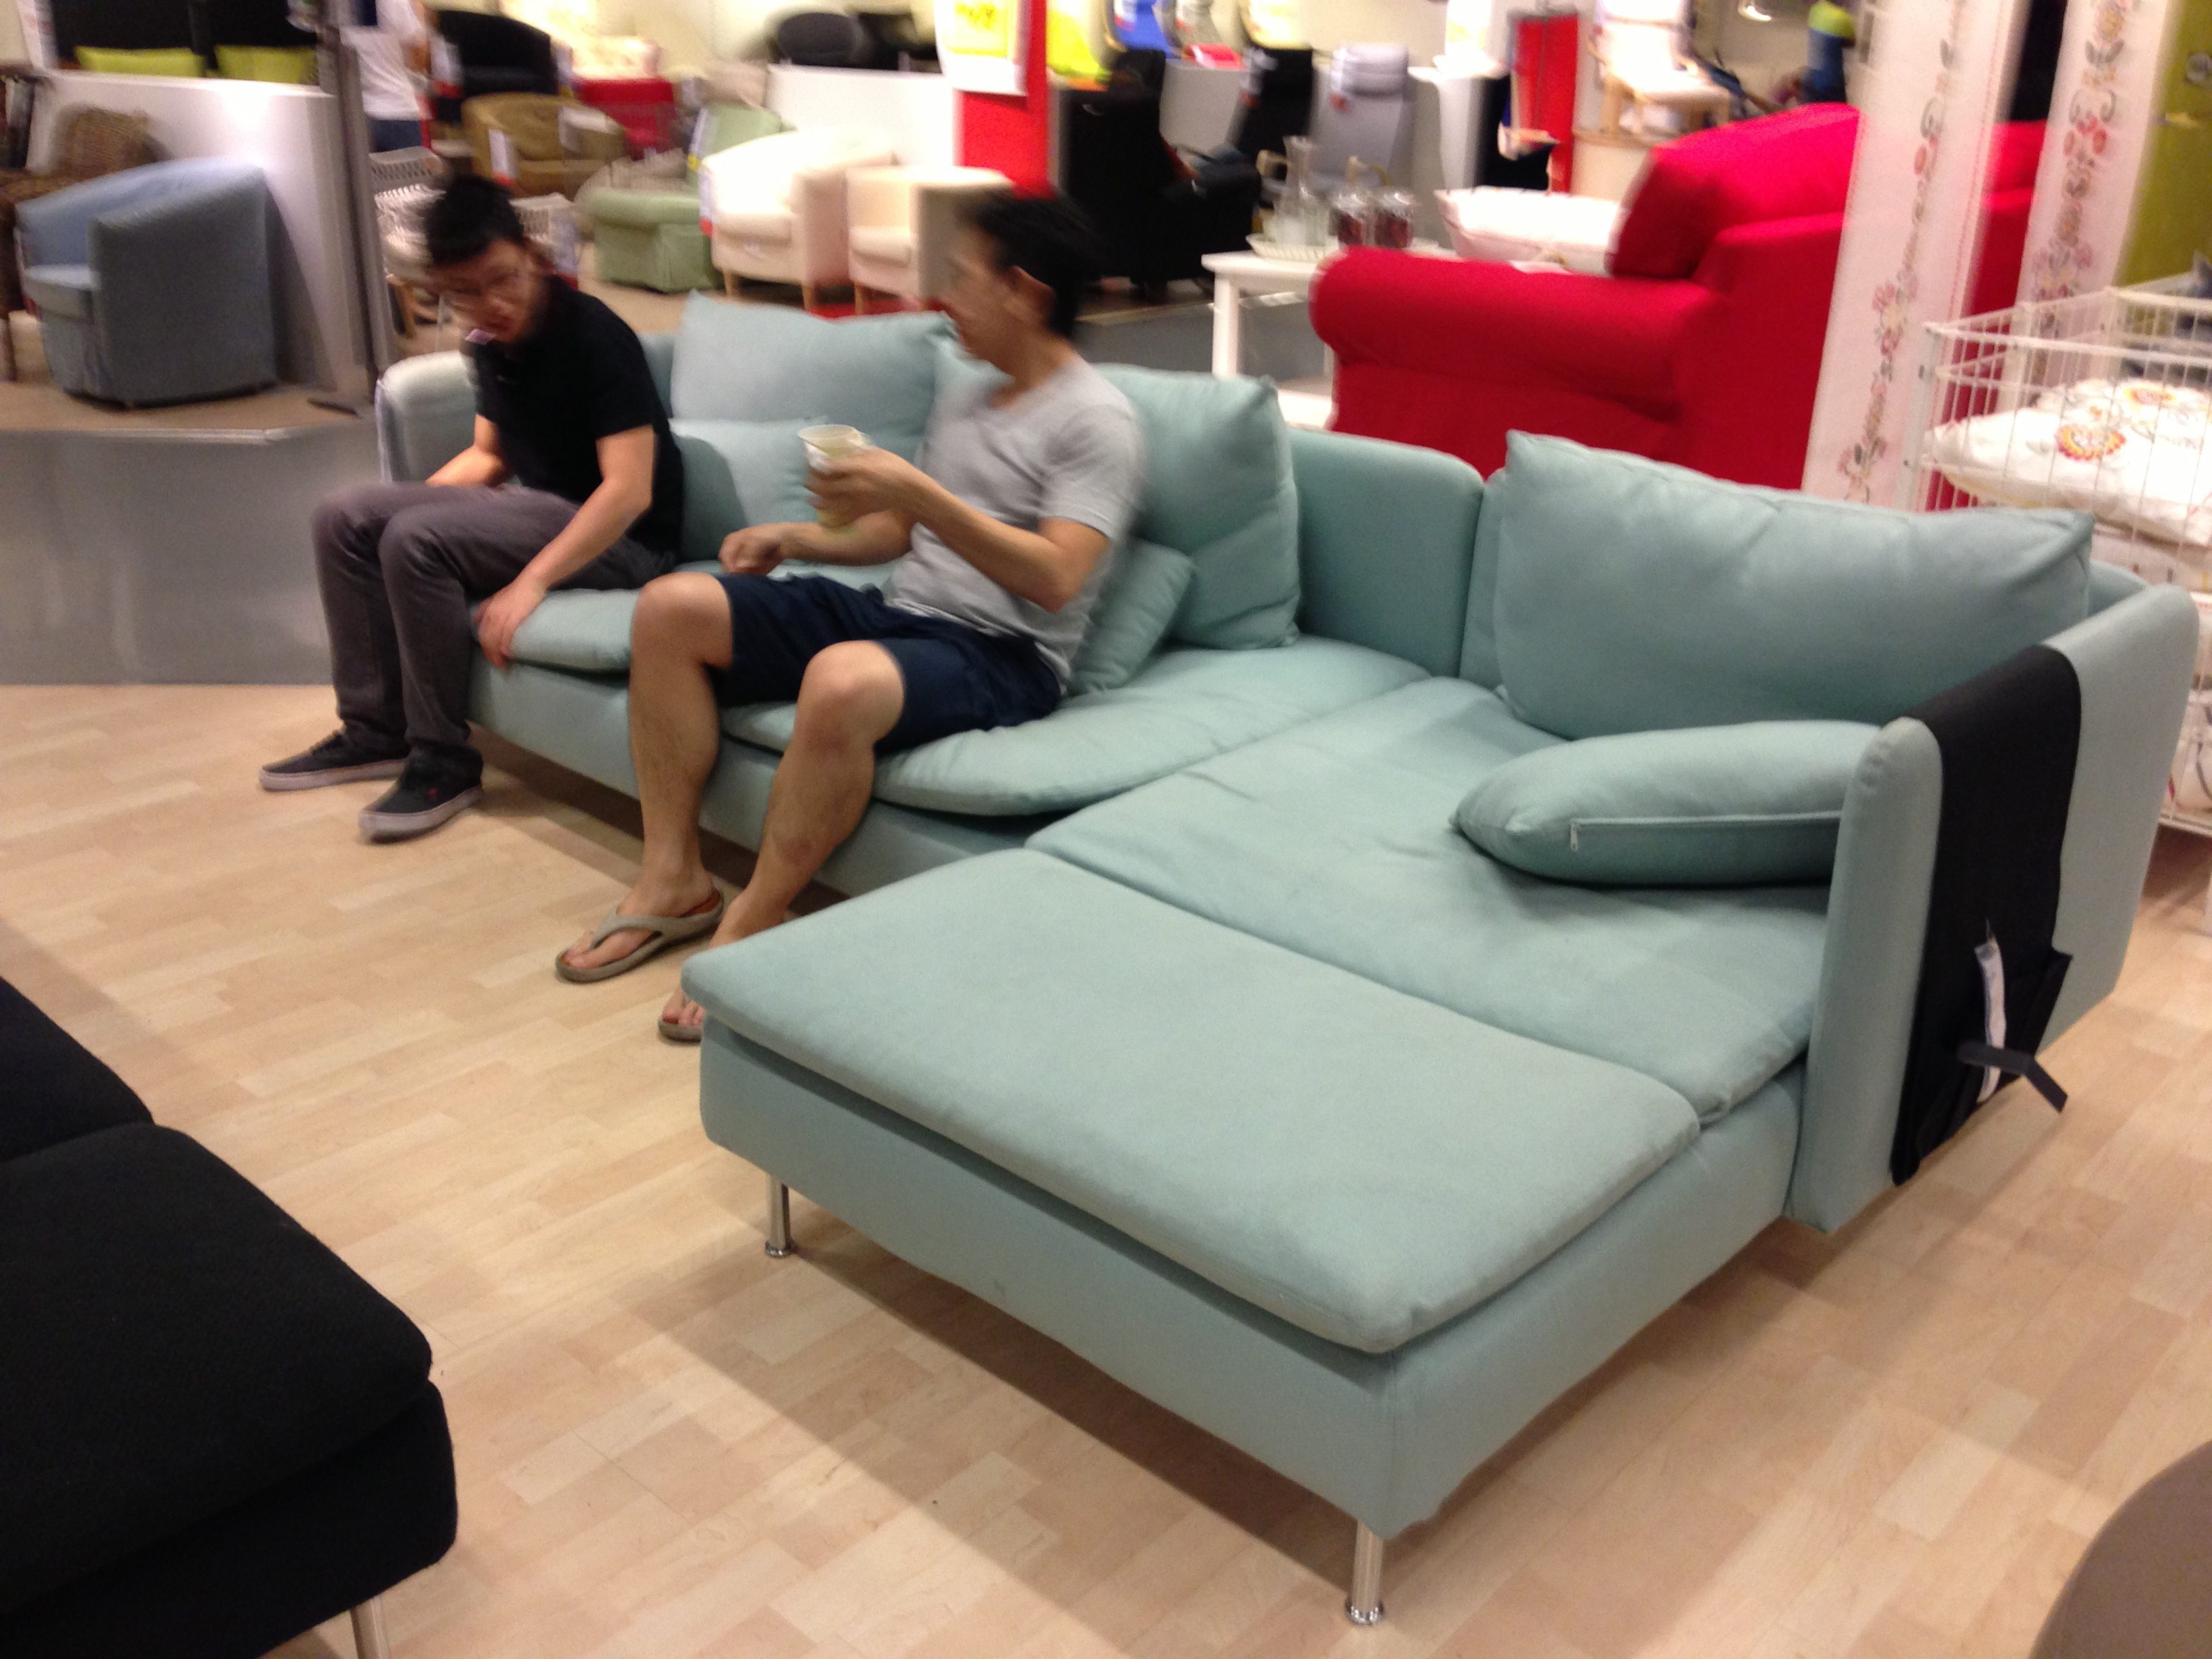 New IKEA soderhamn couch series 